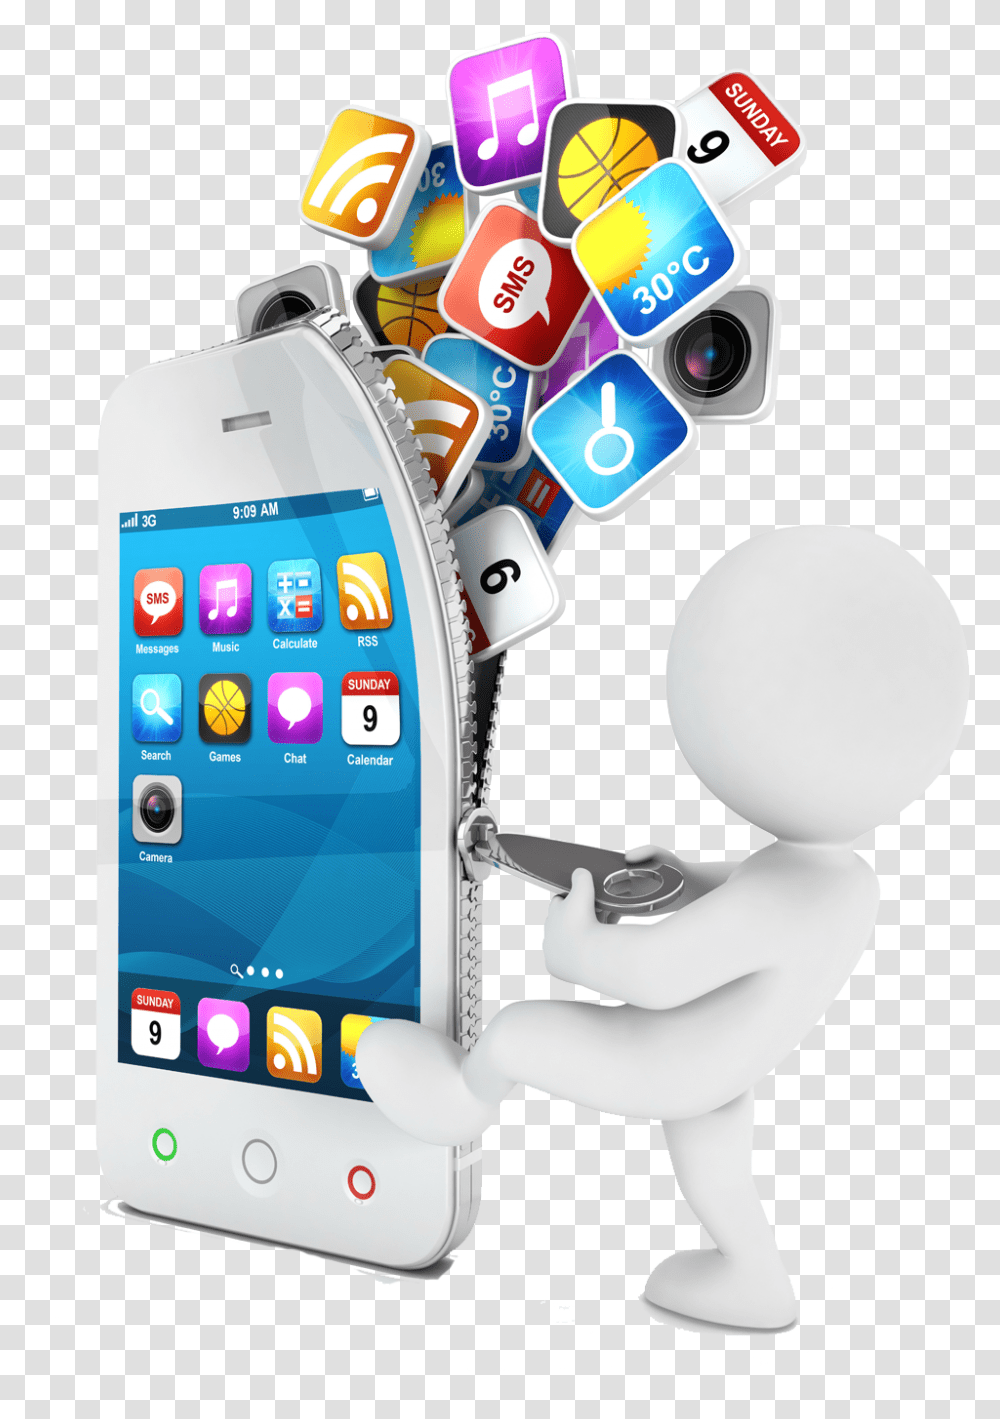 Mobile Apps Vietnam Mobile Telecom Services, Electronics, Phone, Mobile Phone, Cell Phone Transparent Png